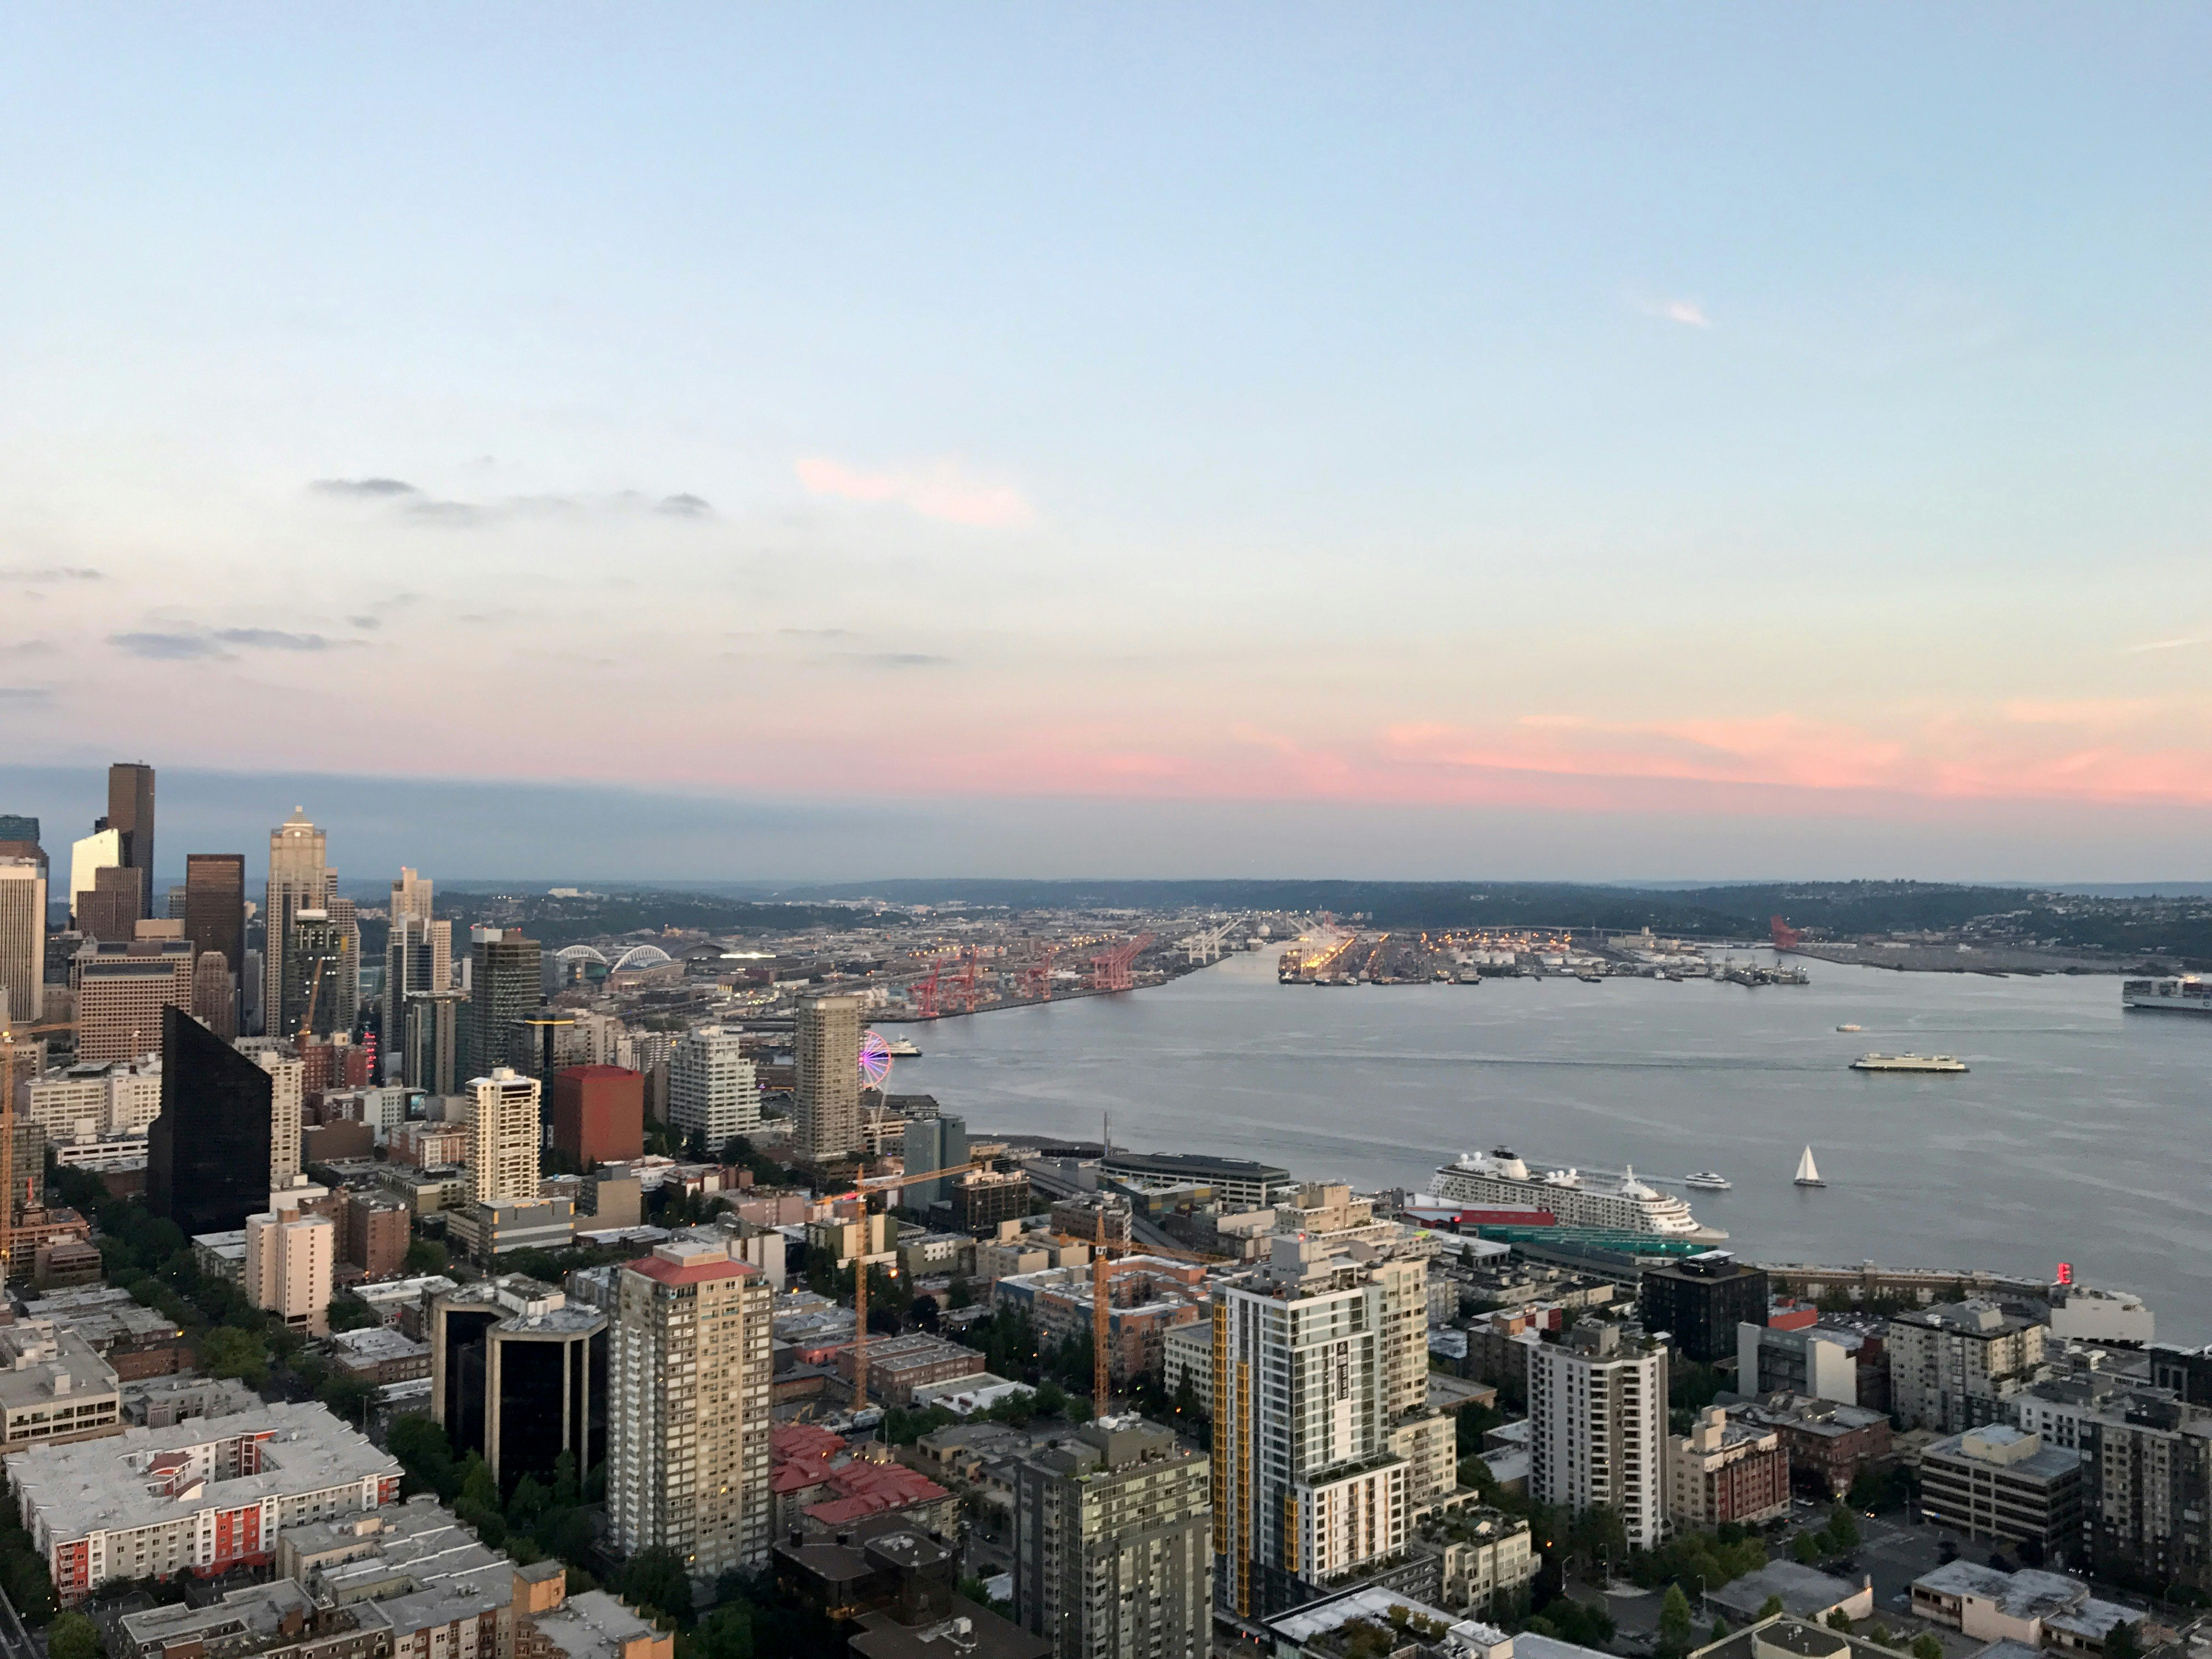 taken from the observatory level at the Space Needle in Seattle, WA